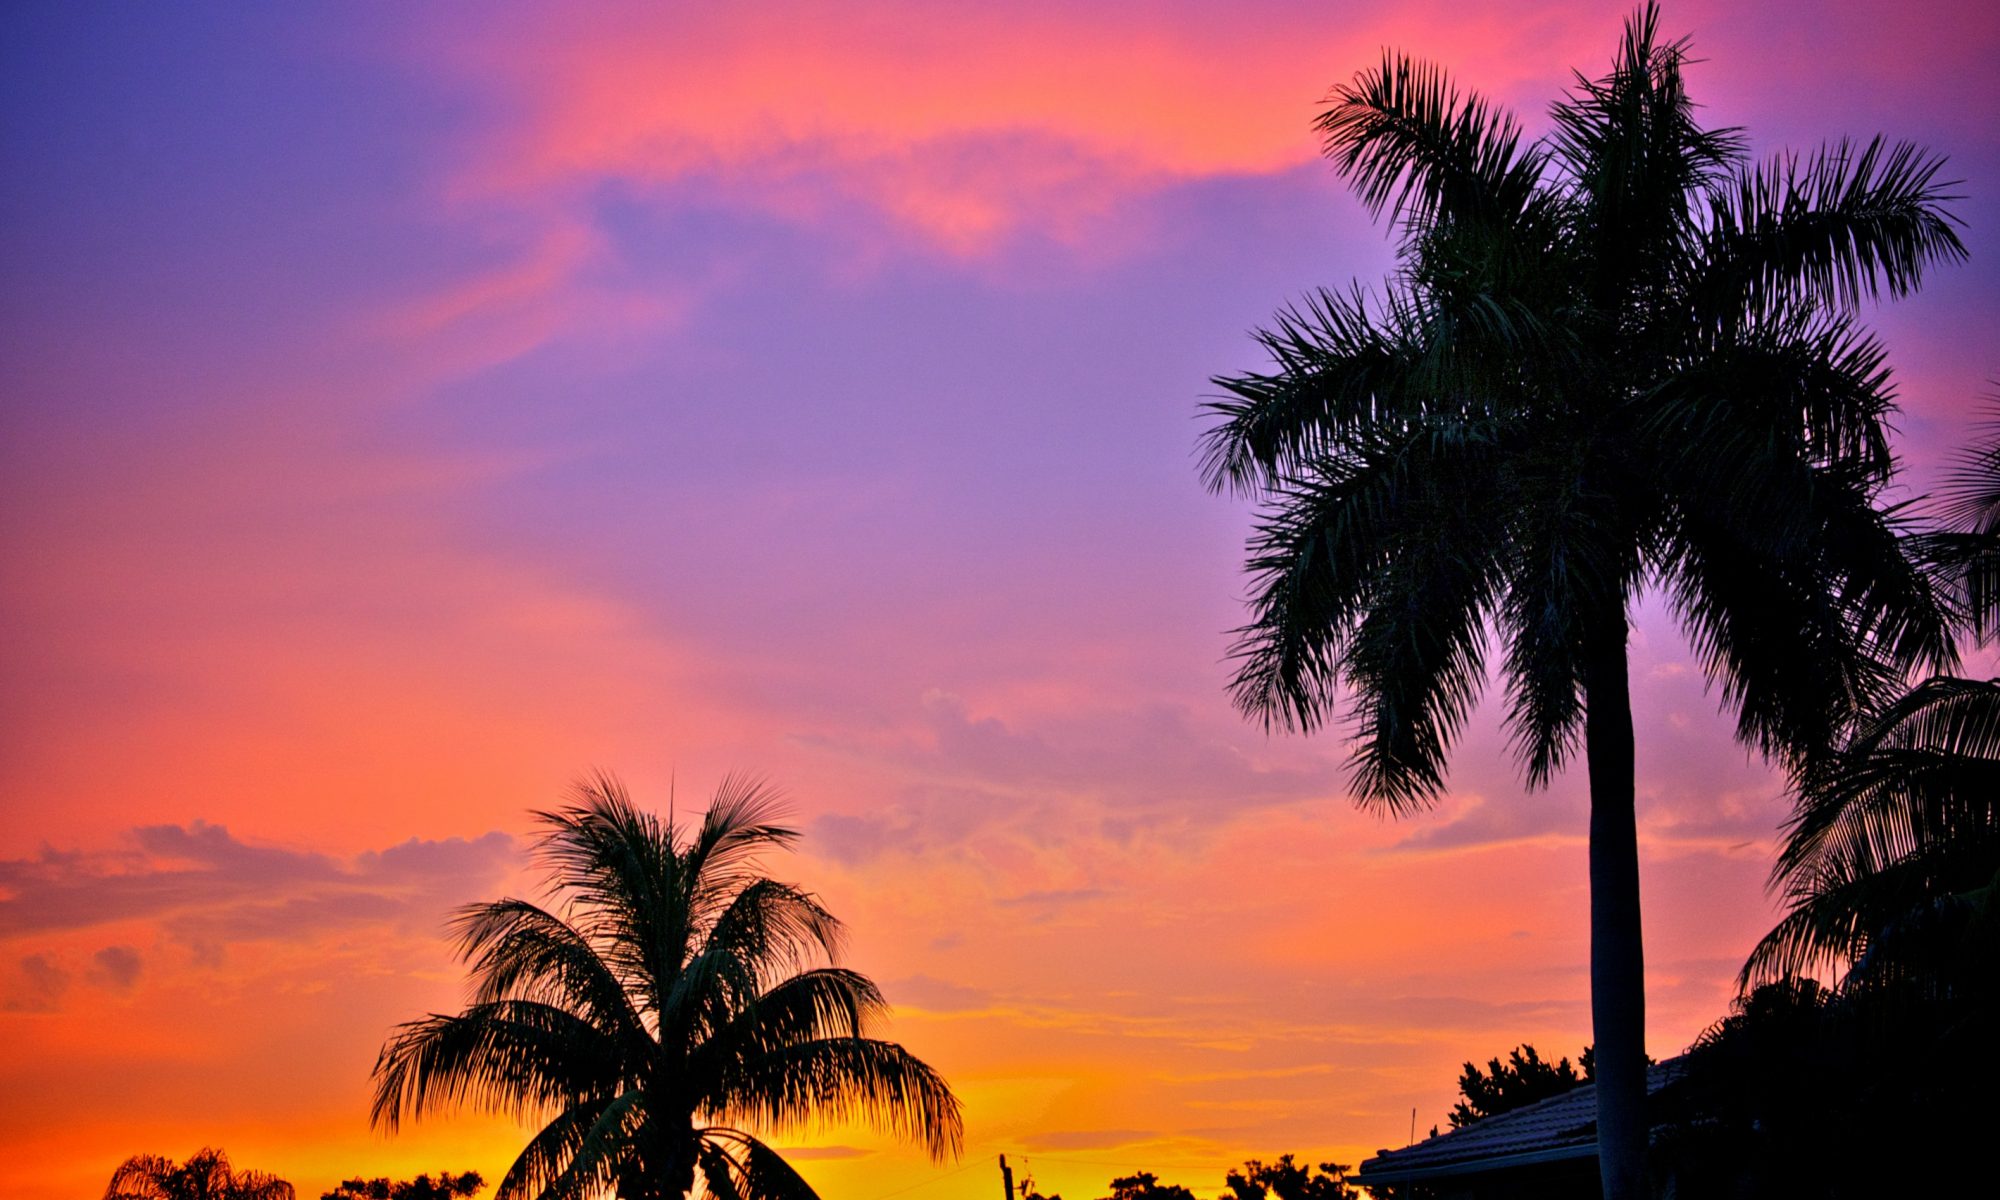 Sunset Palms at RealtyCentral.com LLC